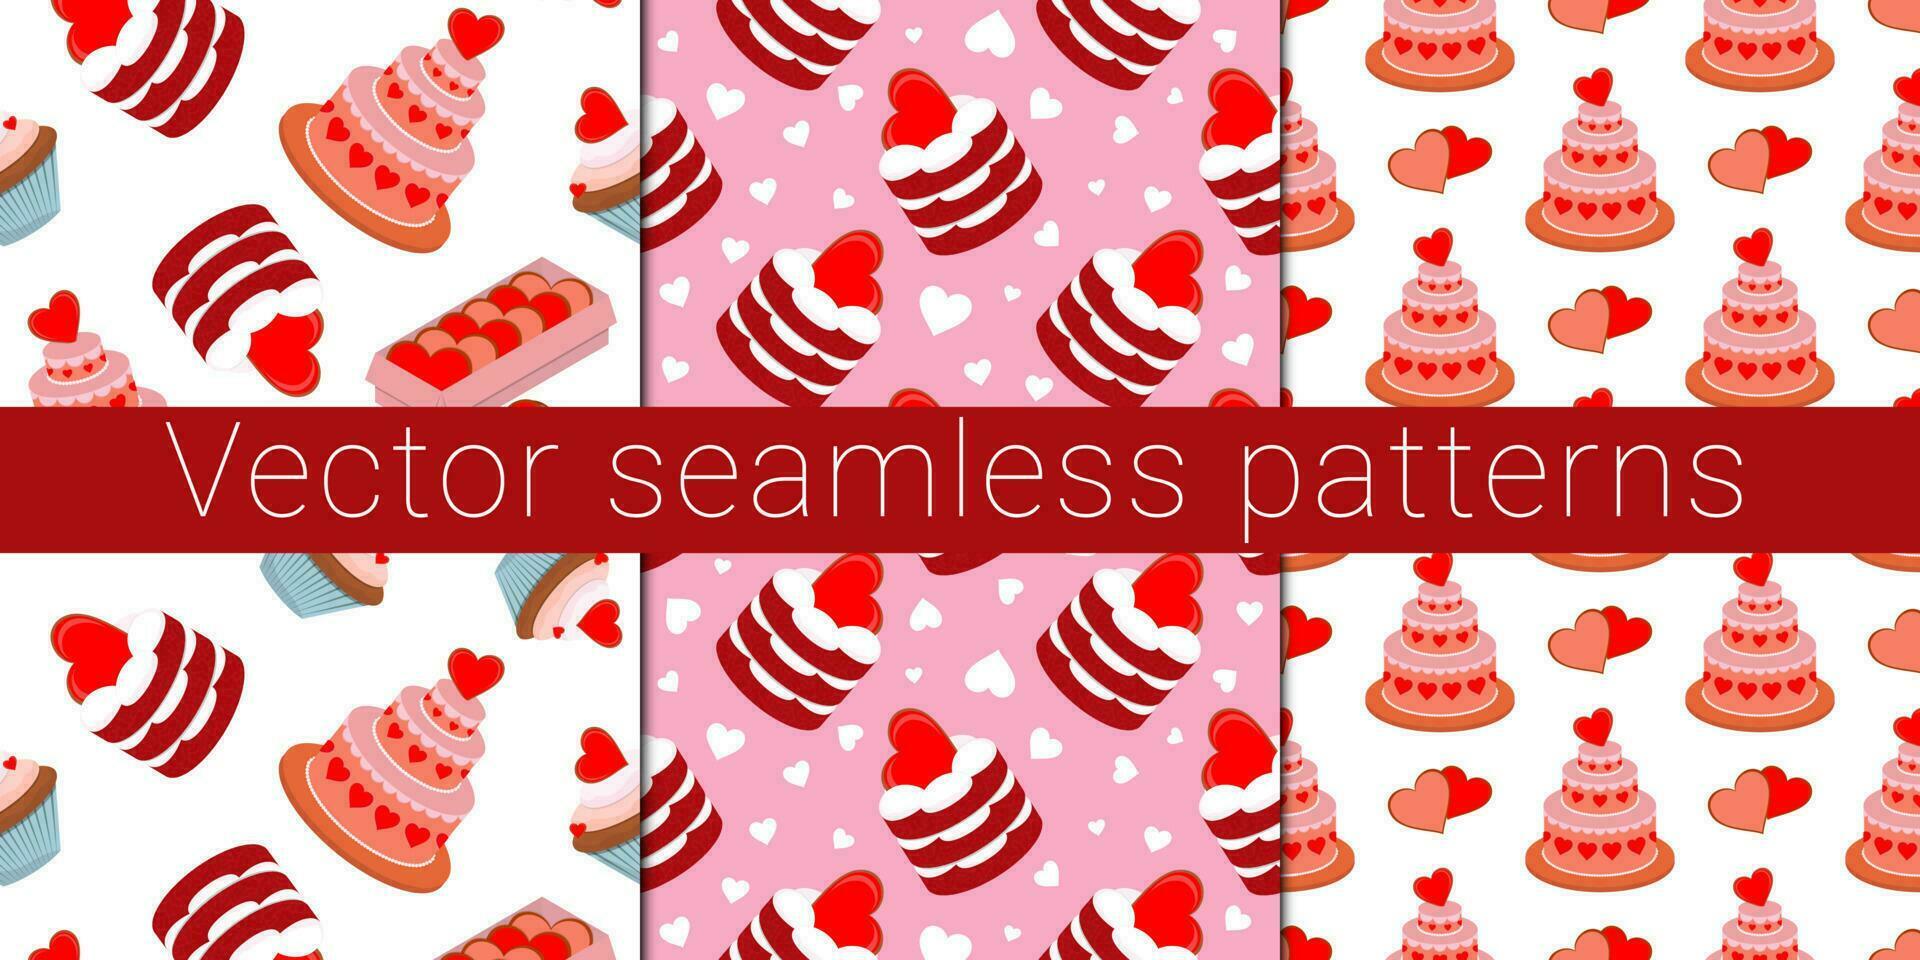 Collection of vector seamless patterns for valentine's day. Cakes and pastries.